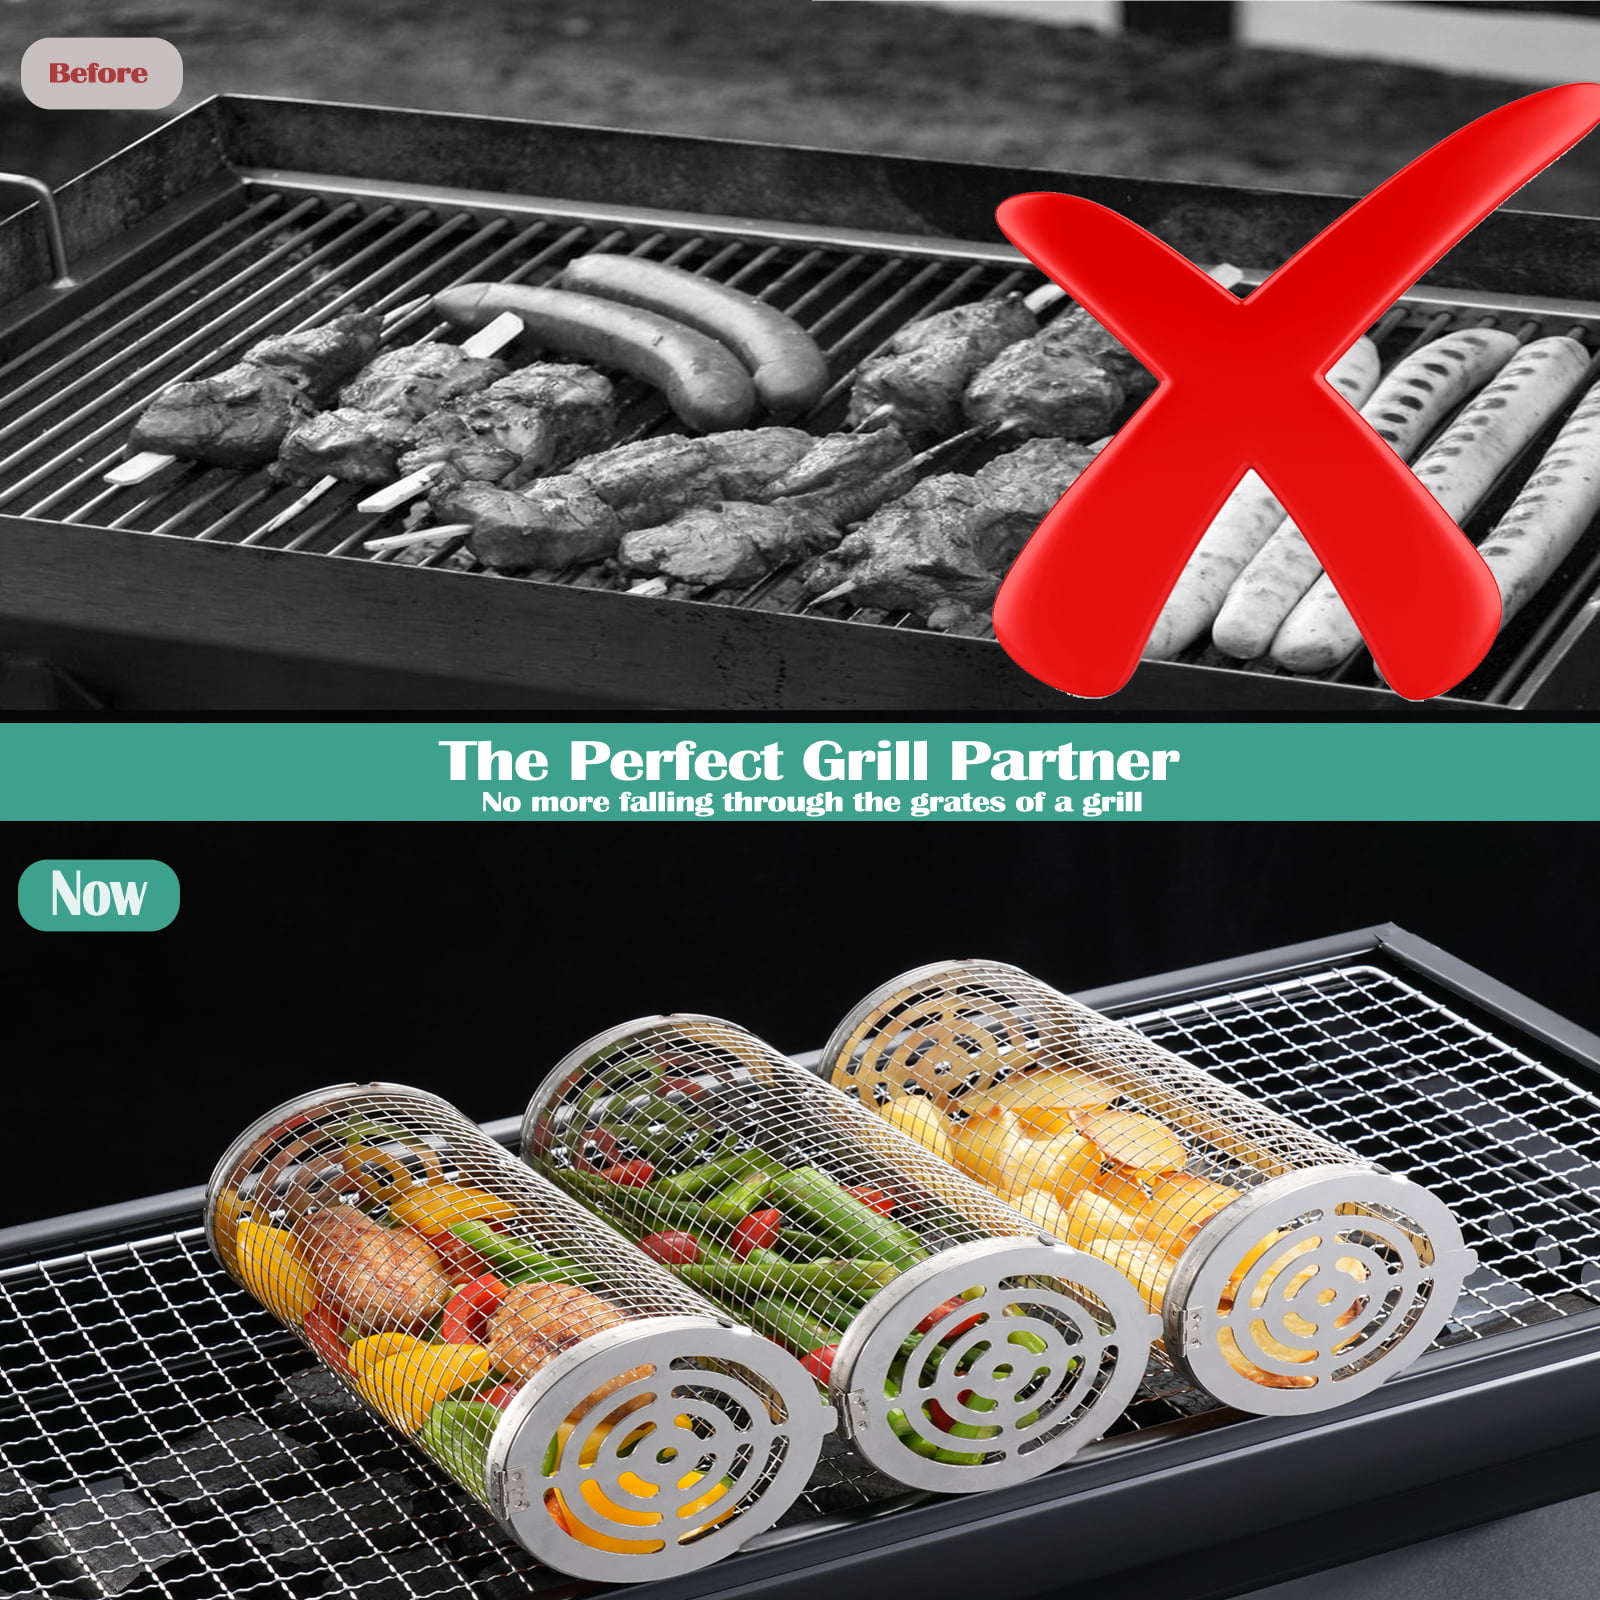 Daioloes BBQ Net Tube 2 Pack, Rolling Grilling Basket 12 Inch, Non-Stick  Barbecue Basket Rotisserie with Removable Mesh Cover, Grill Tool with 2 Bbq